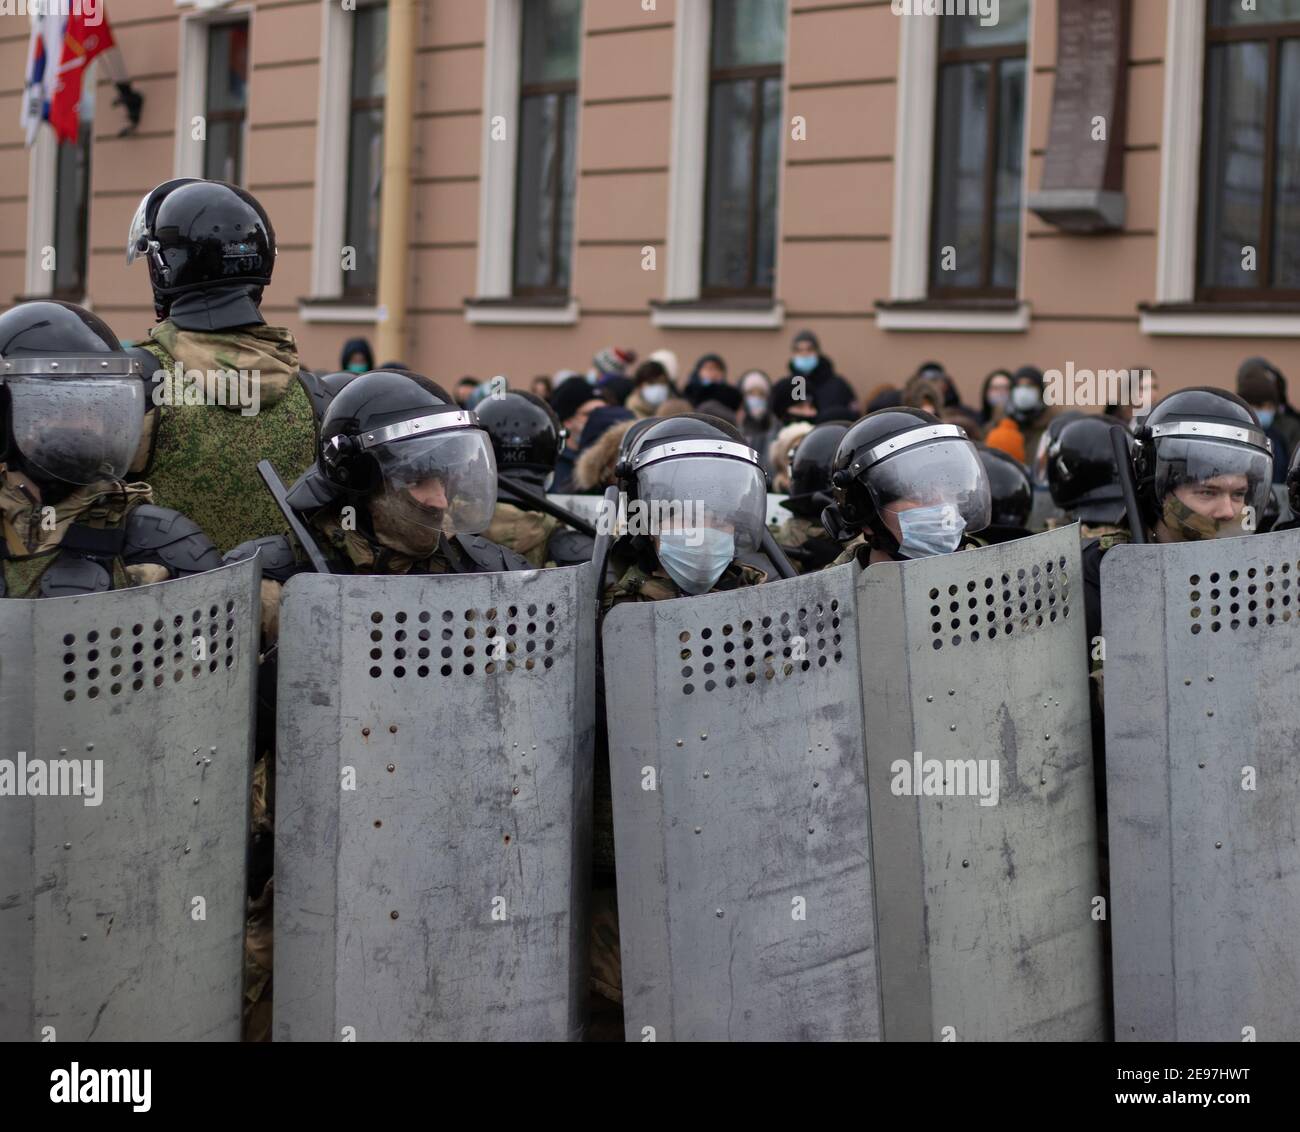 Saint Petersburg, Russia - 31 January 2021: Special riot police force squad on street, Illustrative Editorial Stock Photo